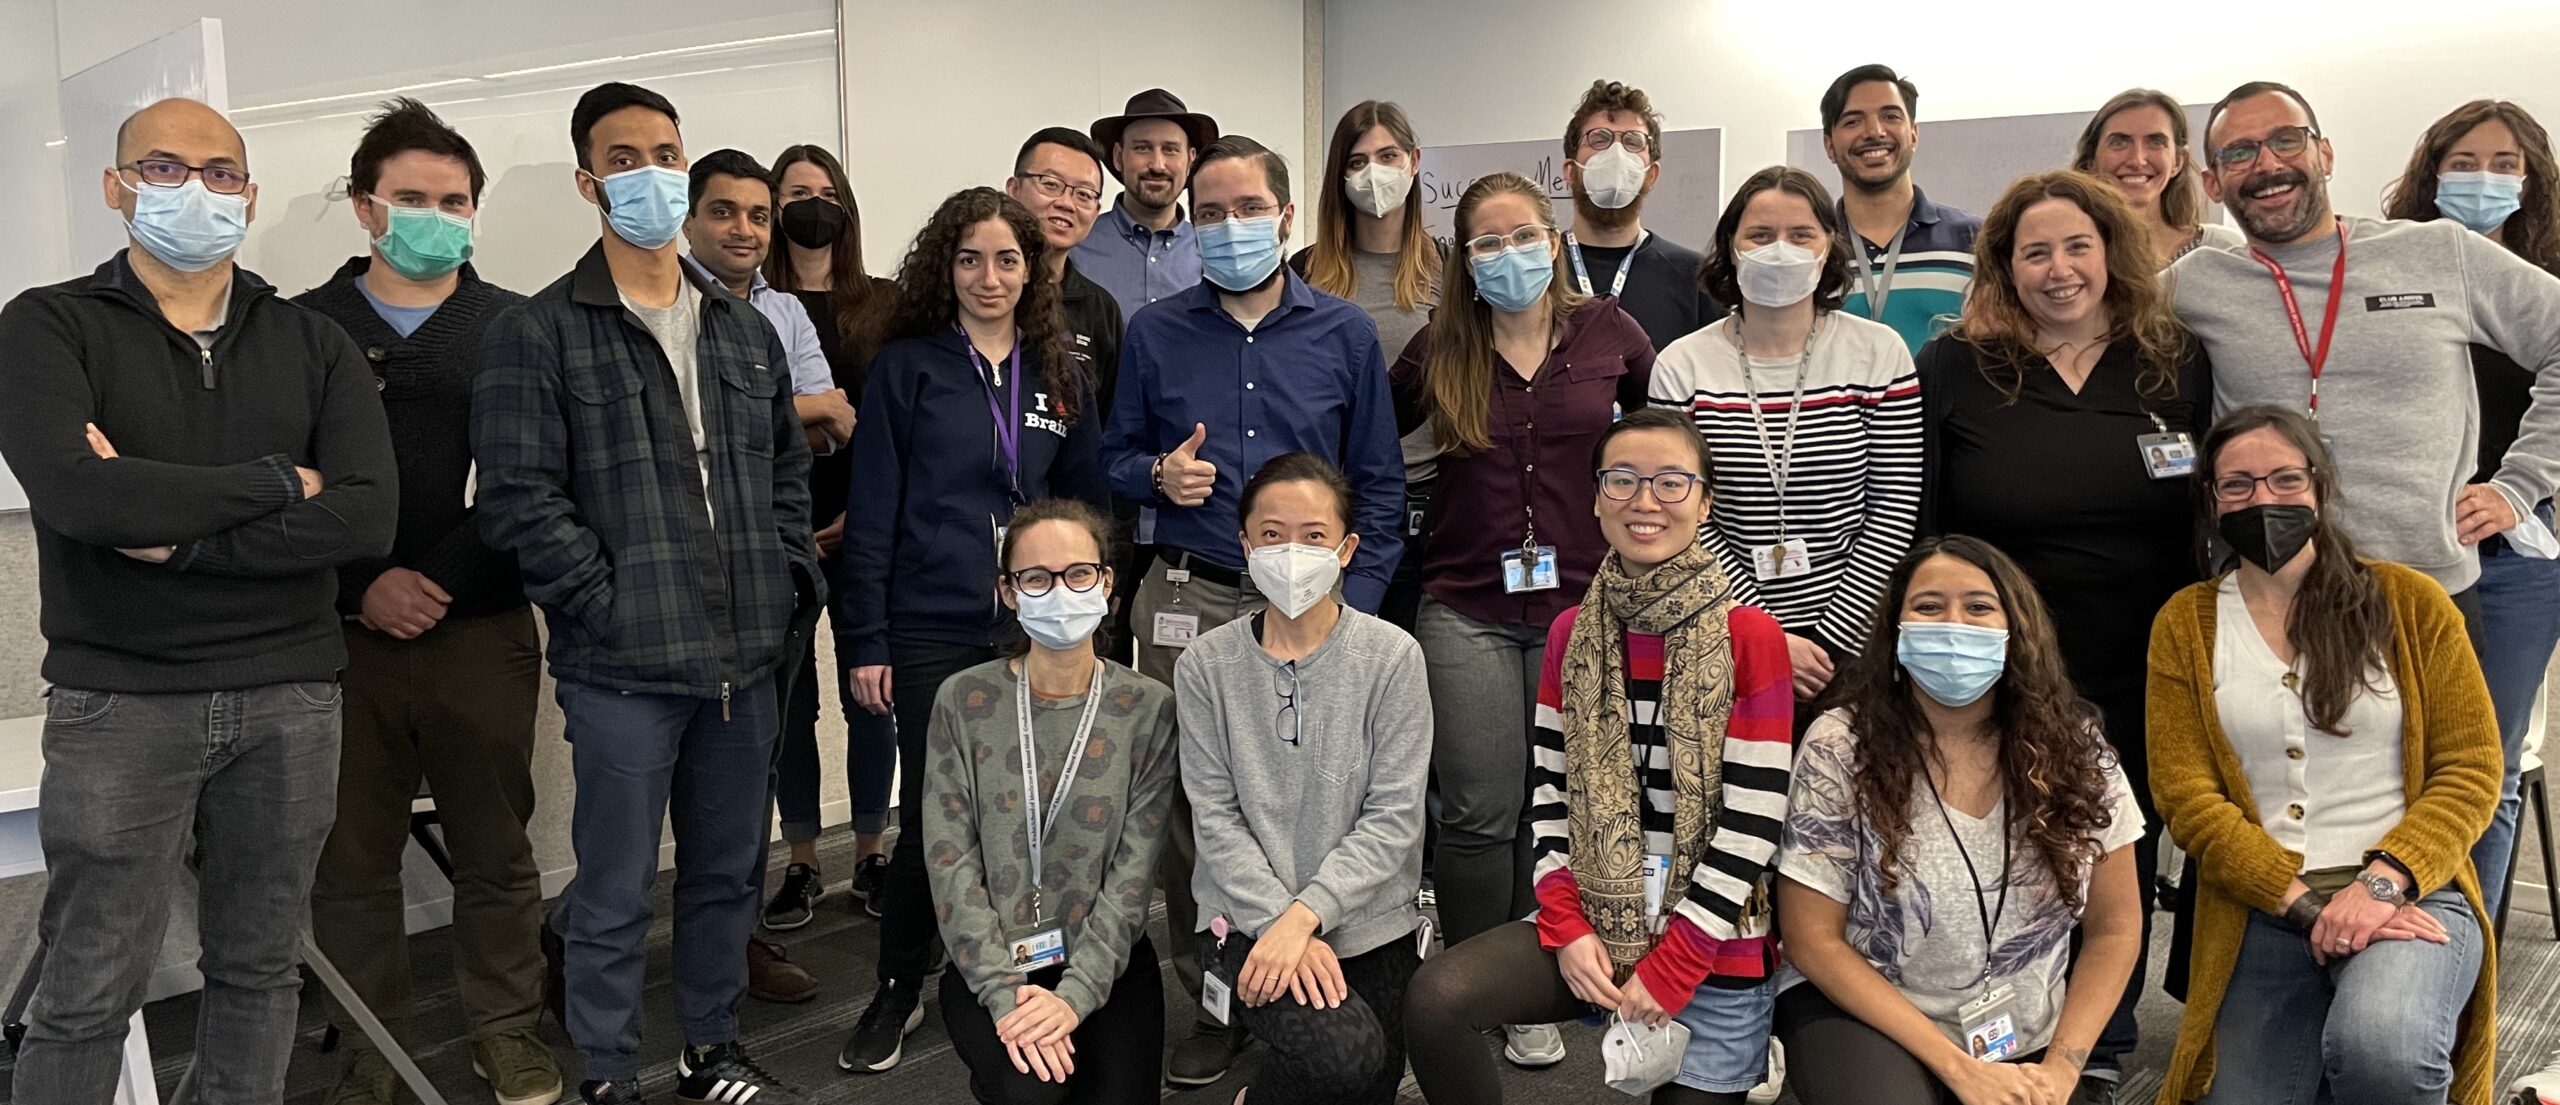 A large group of Mount Sinai postdocs who are joining together to form a union are standing side by side looking at the camera. Many are wearing masks.